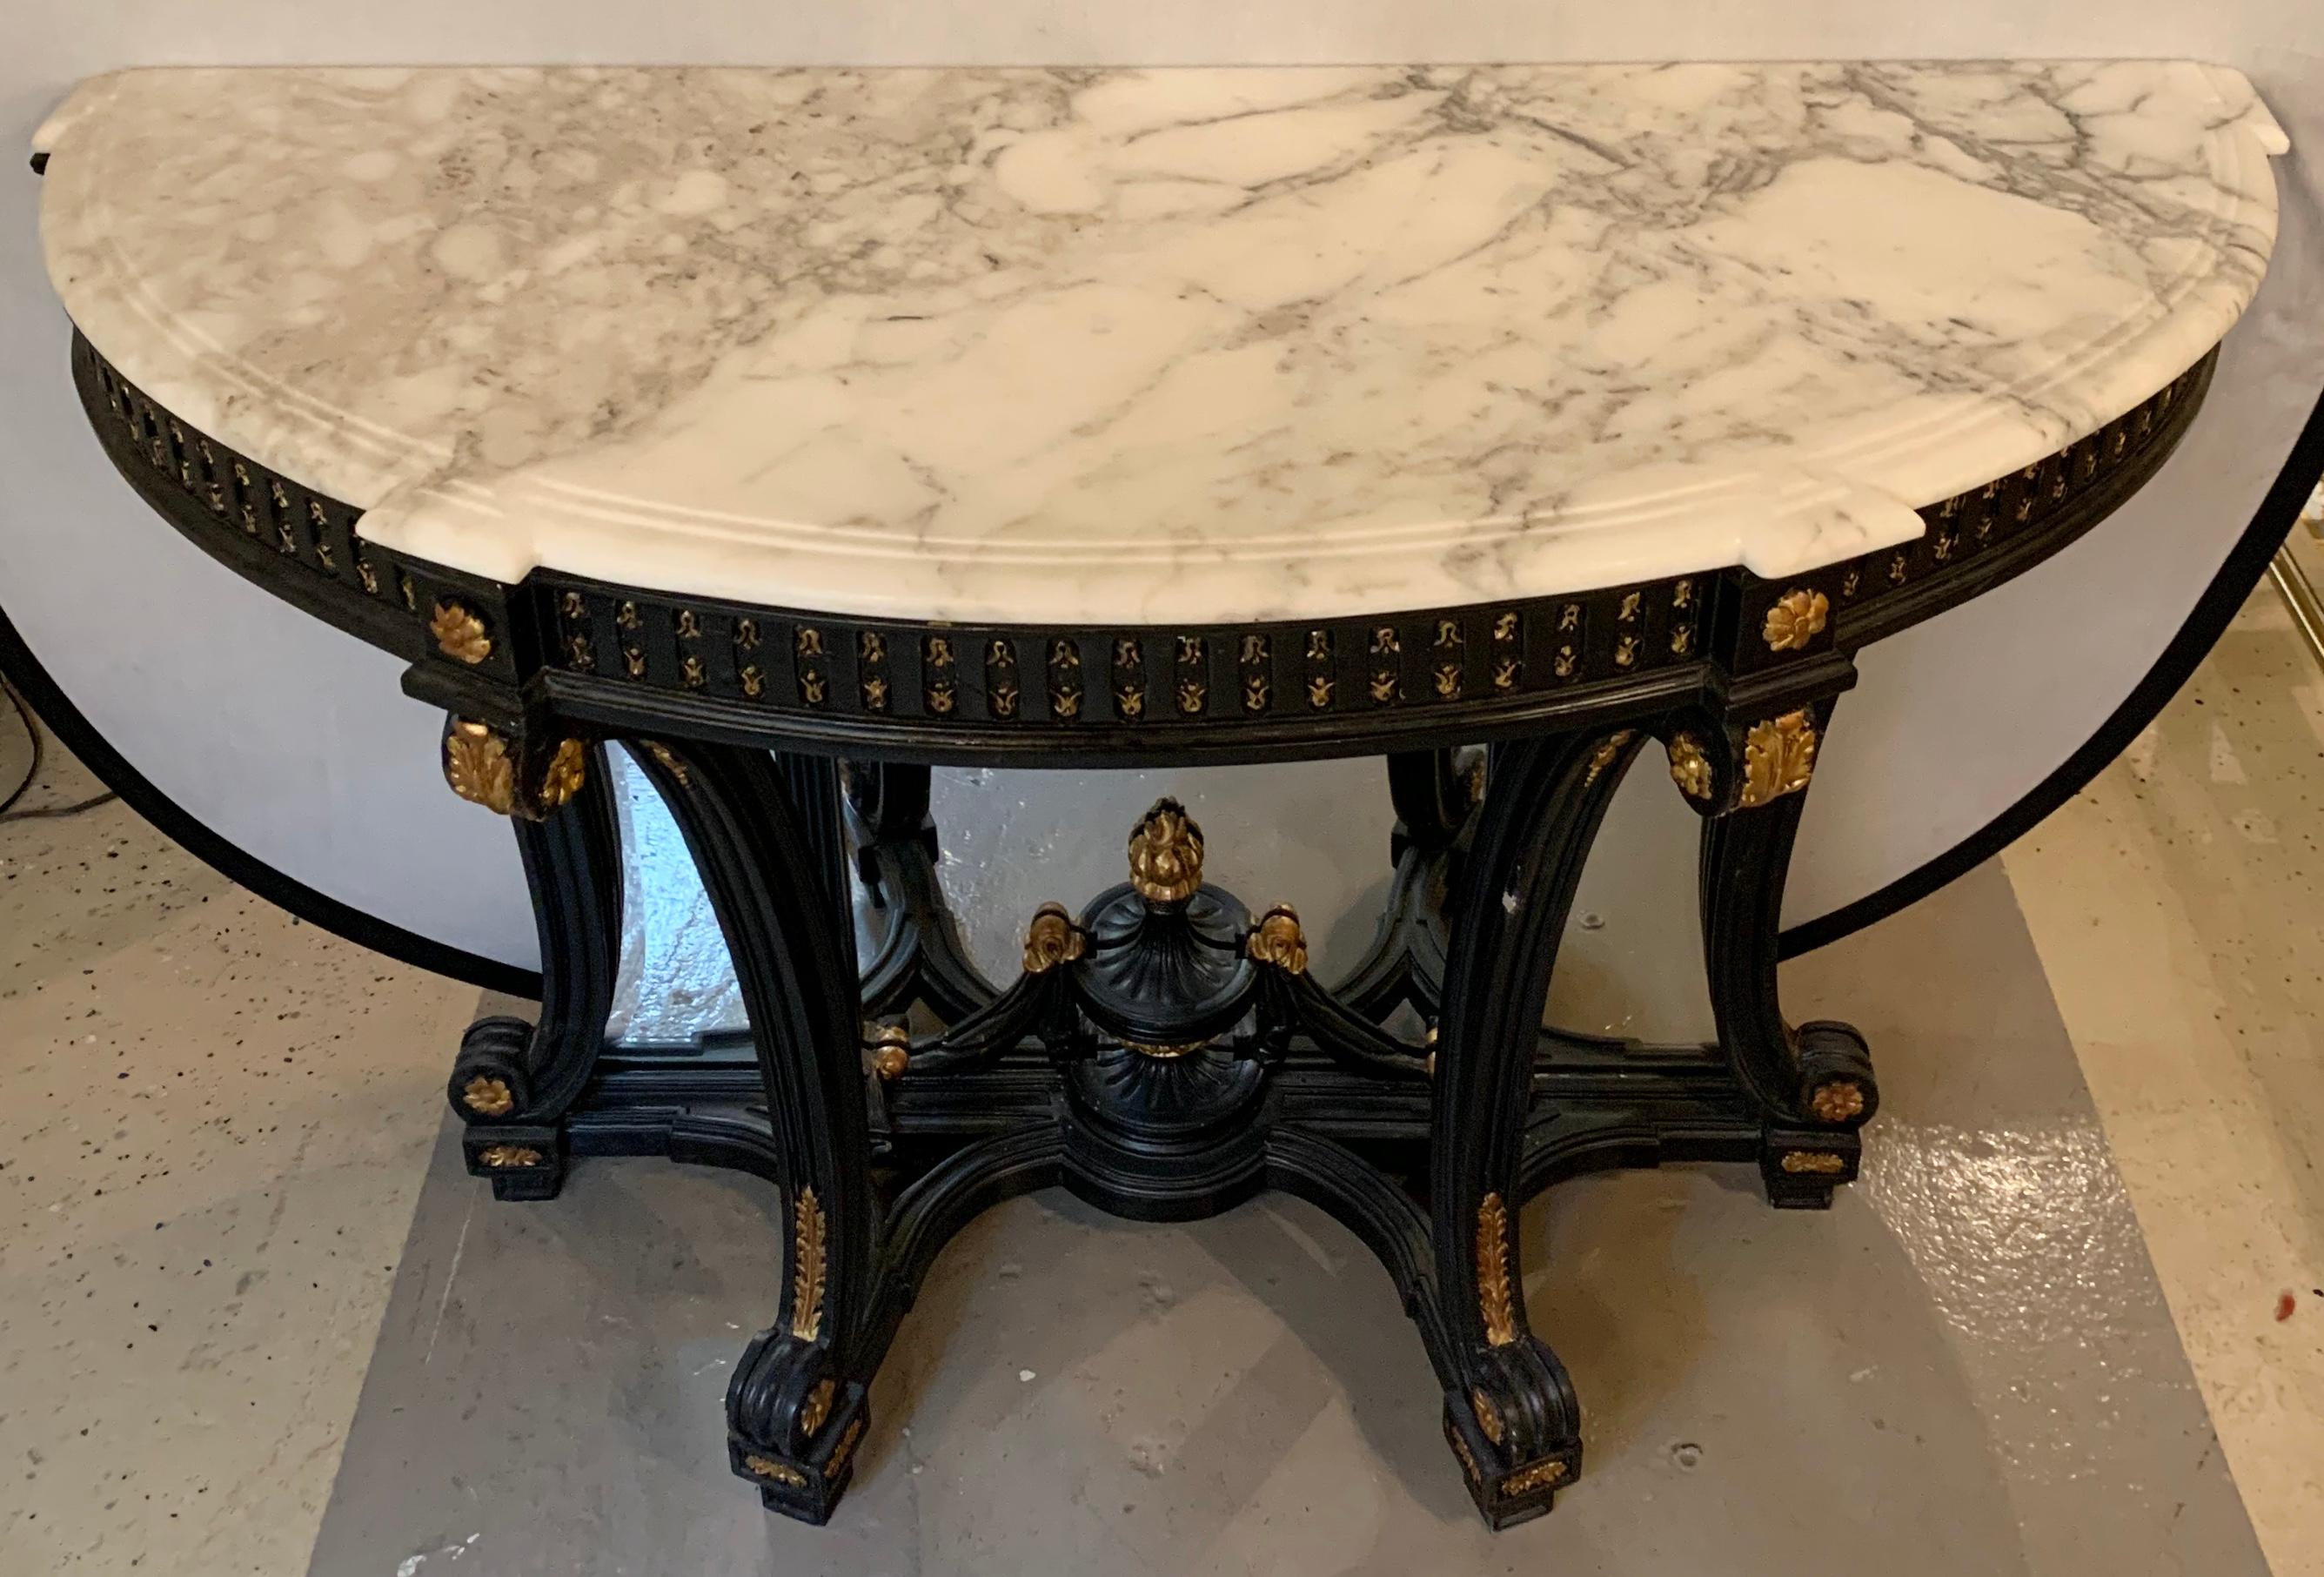 20th Century Demi Lune Ebony & Gilt Hollywood Regency Style Marble-Top Consoles, a Pair 